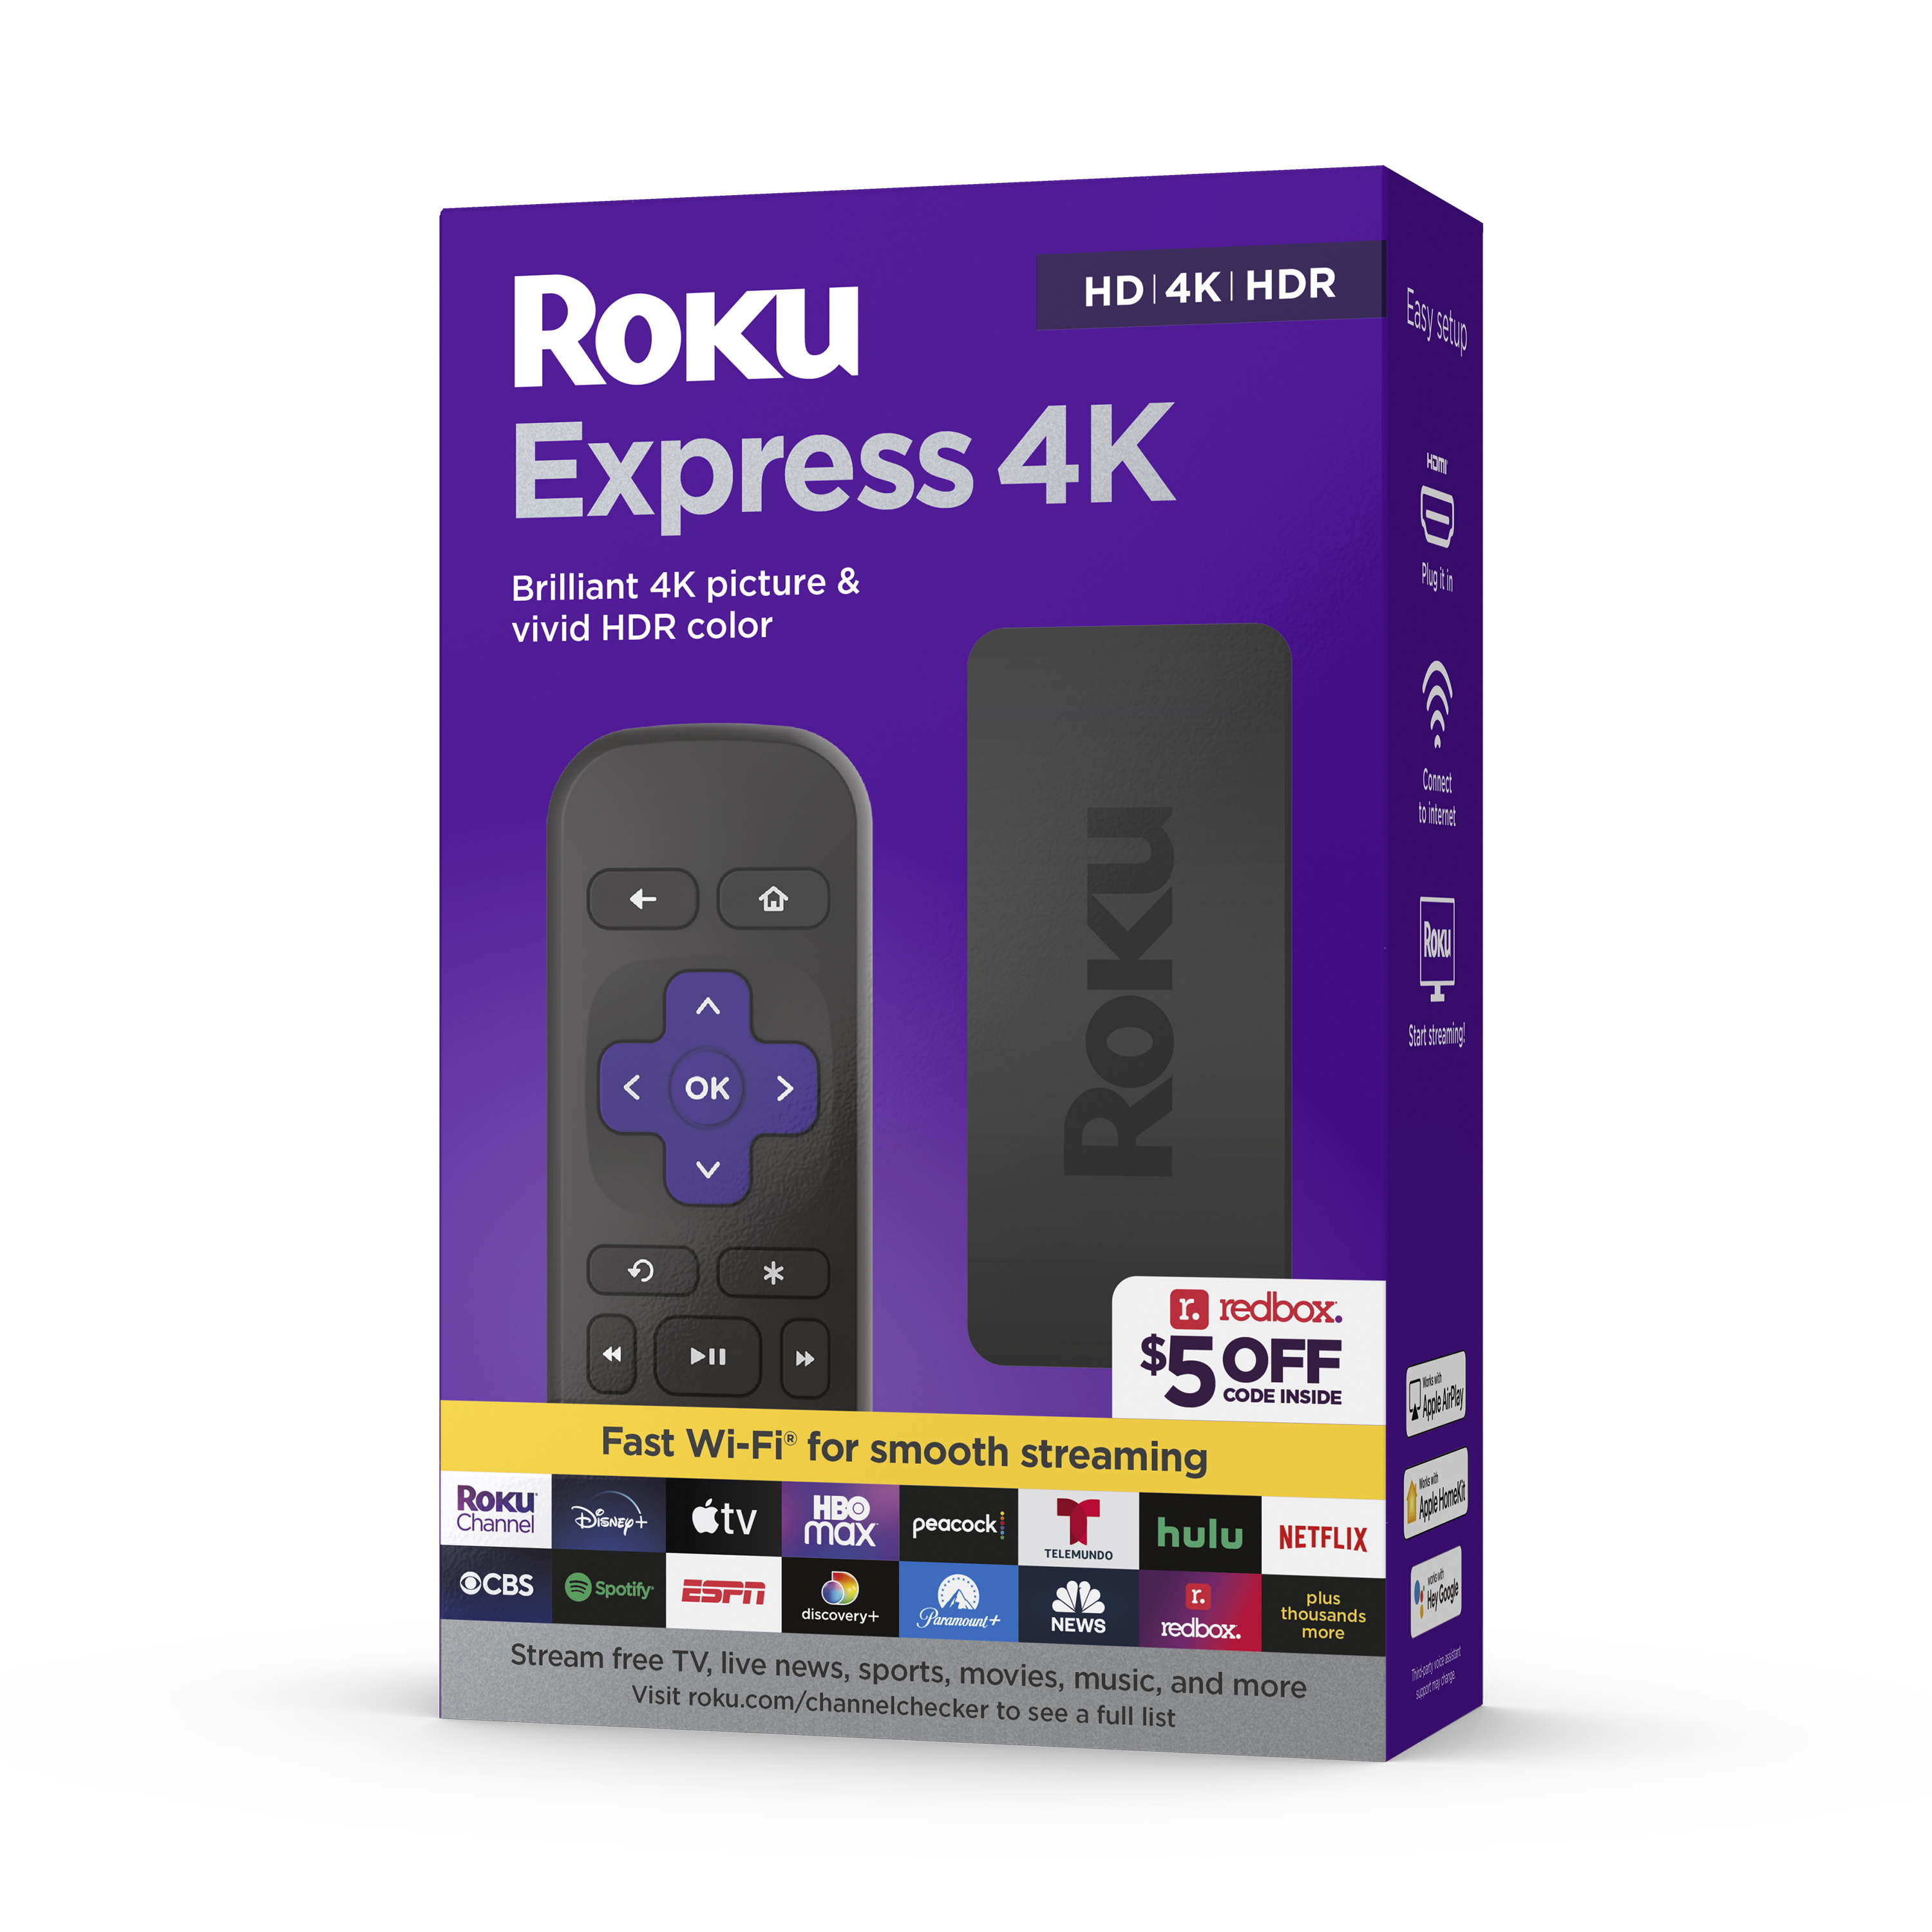 Roku Express 4K | Streaming Player HD/4K/HDR with Standard Remote featuring Shortcut Buttons - image 1 of 11